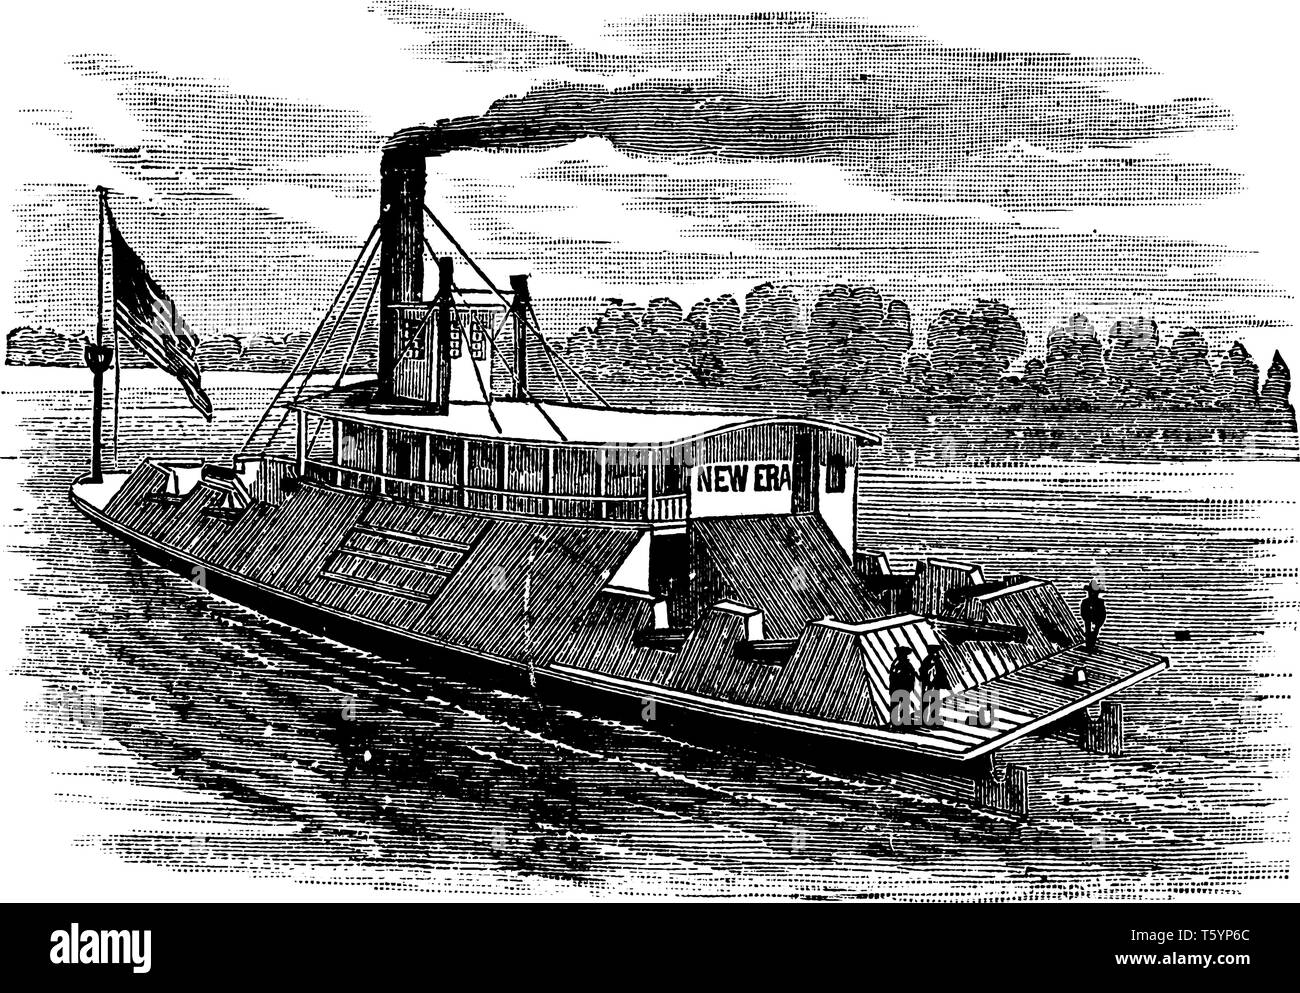 The New Era was a steamer acquired by the Union Navy during the American Civil War, vintage line drawing or engraving illustration. Stock Vector